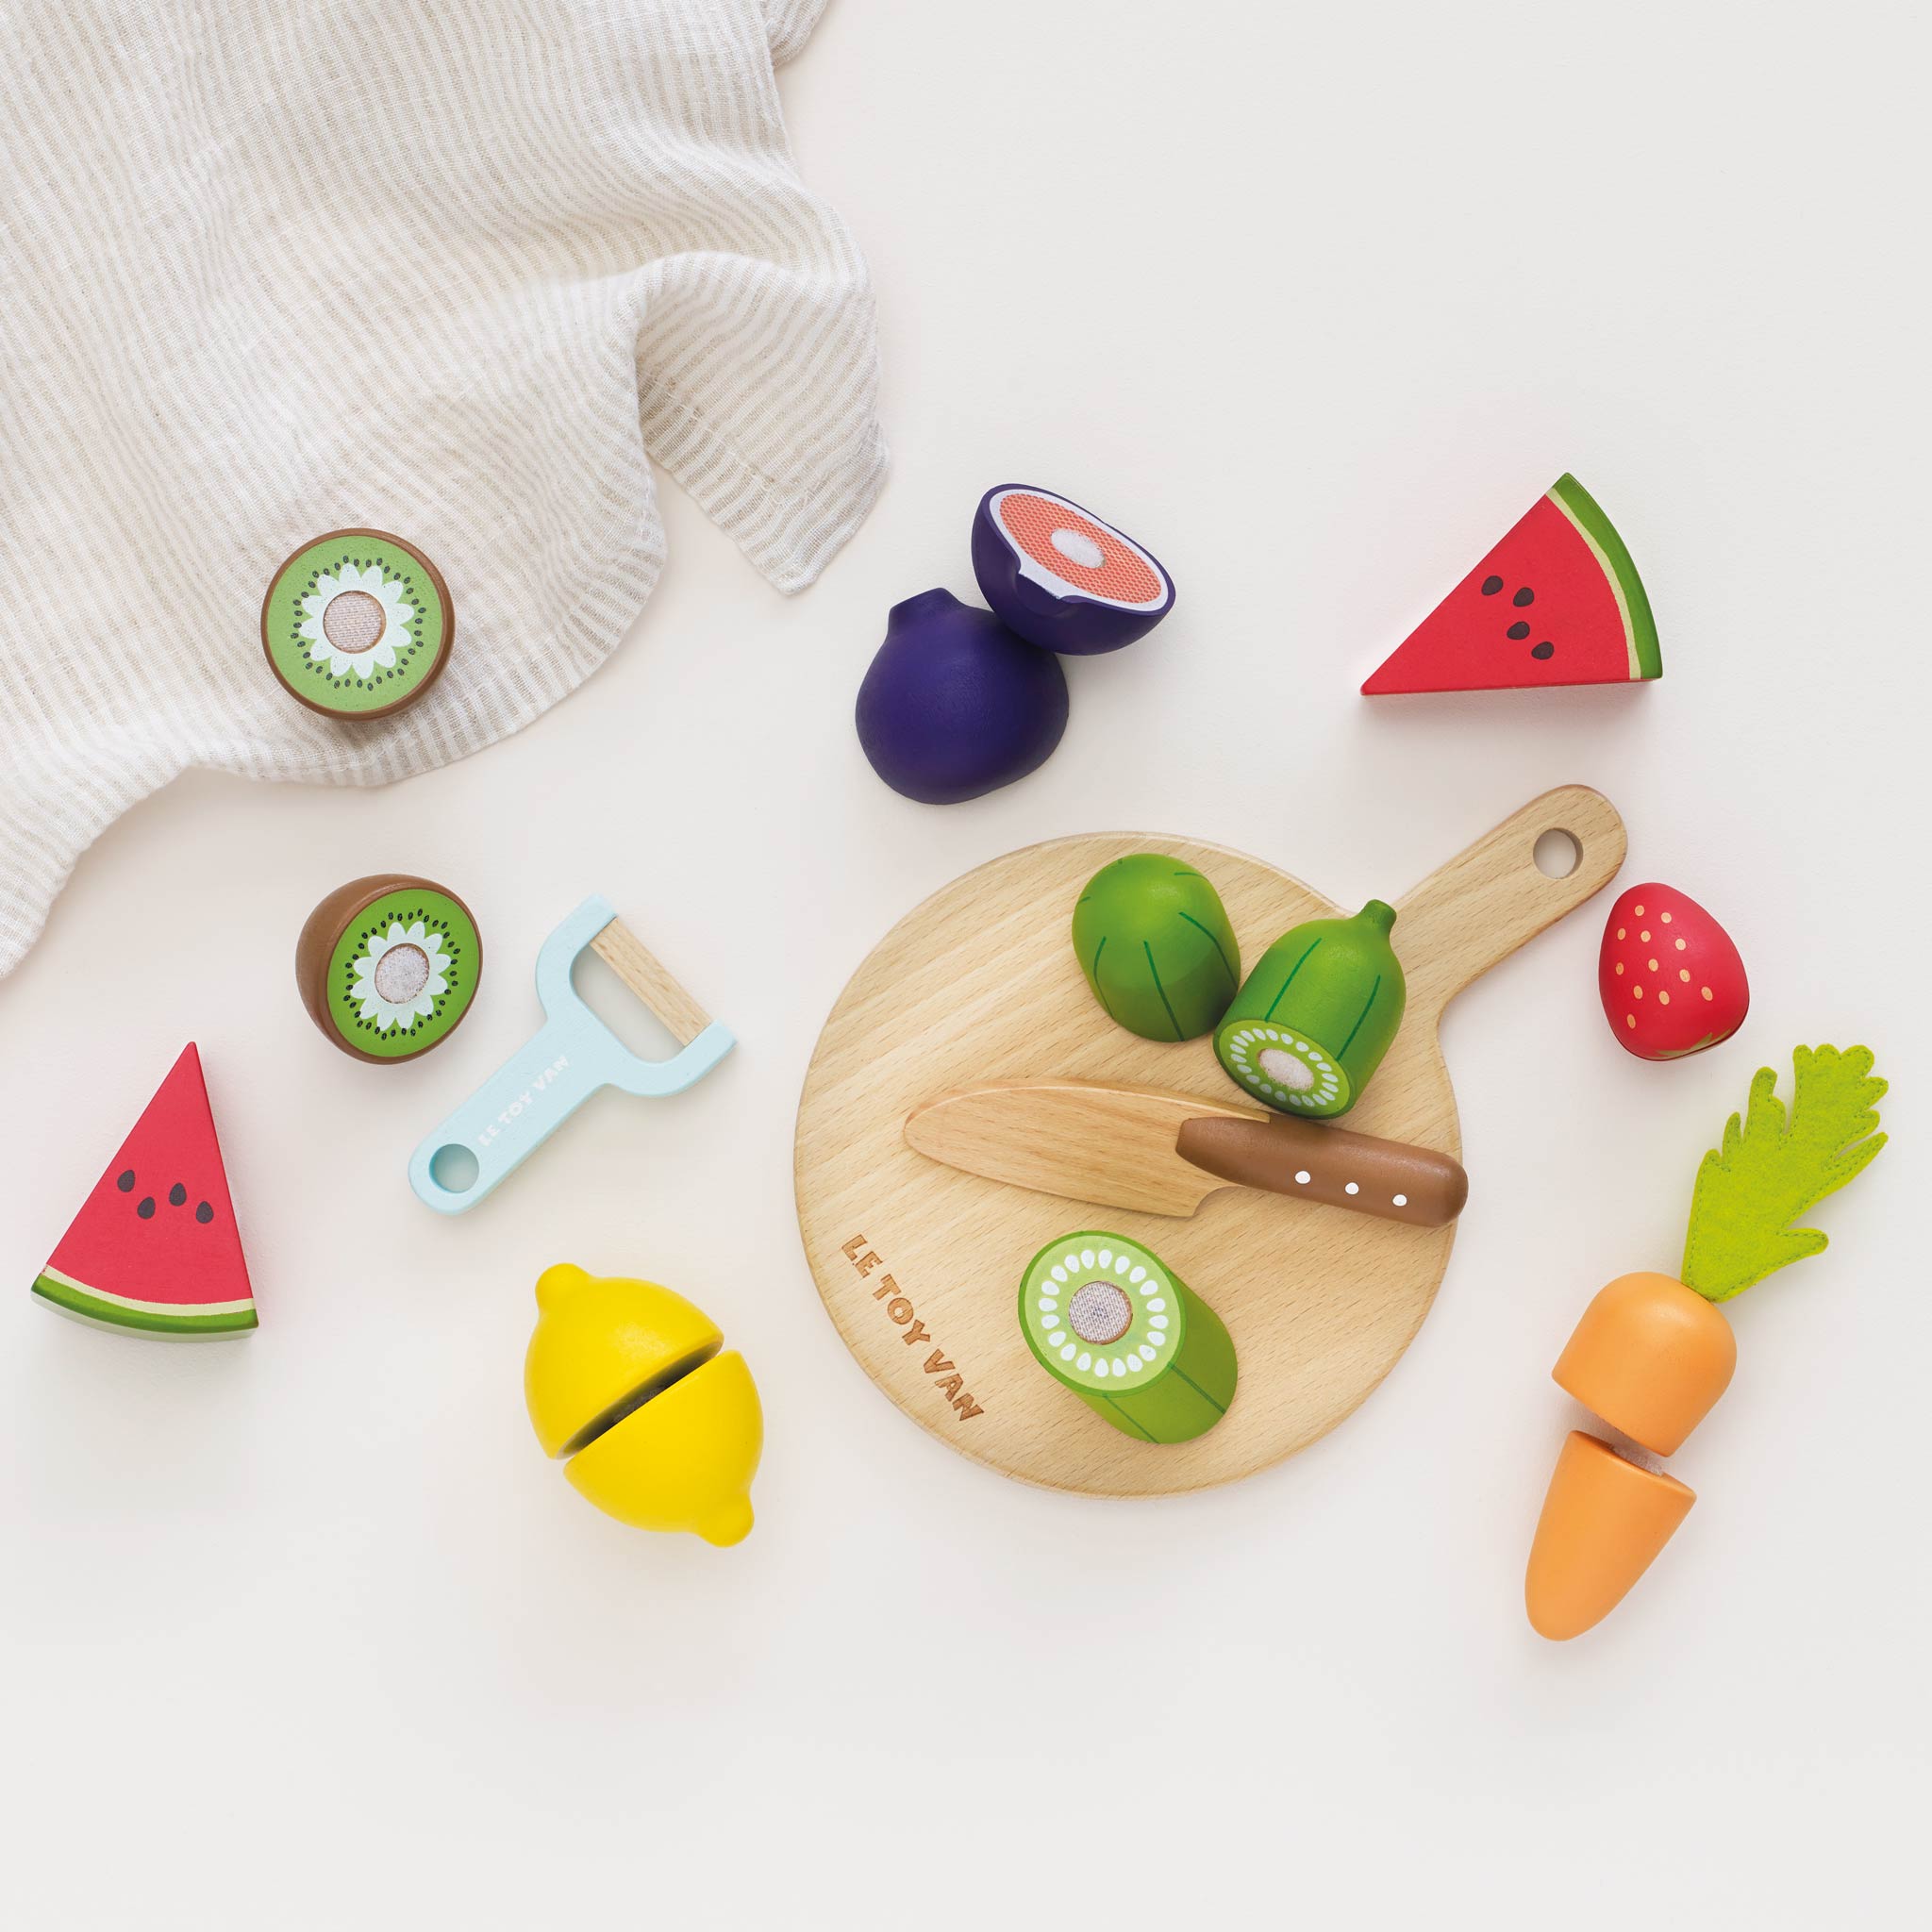 Wooden Chopping Board & Sliceable Play Food